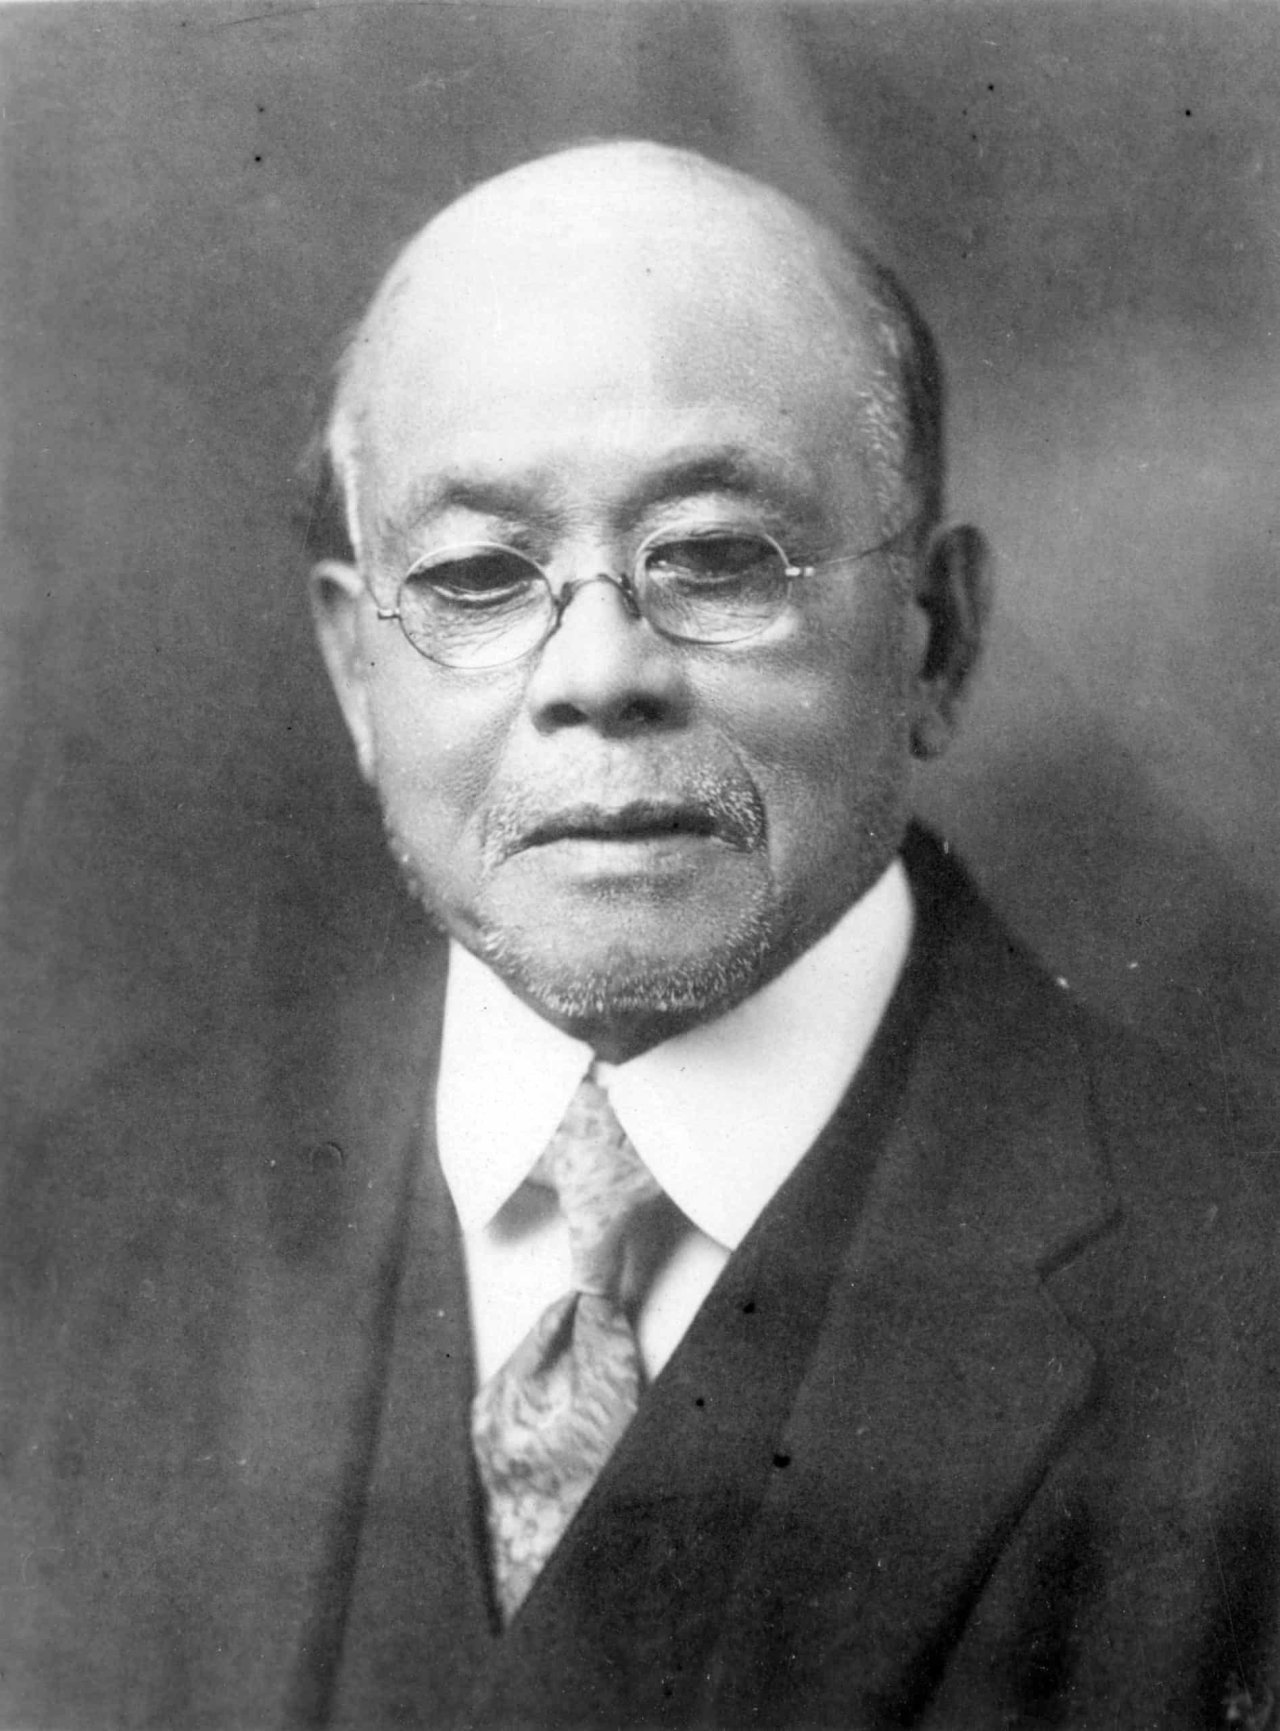 Portrait of Yip Sang from 1920. Source: City of Vancouver Archives 689-129